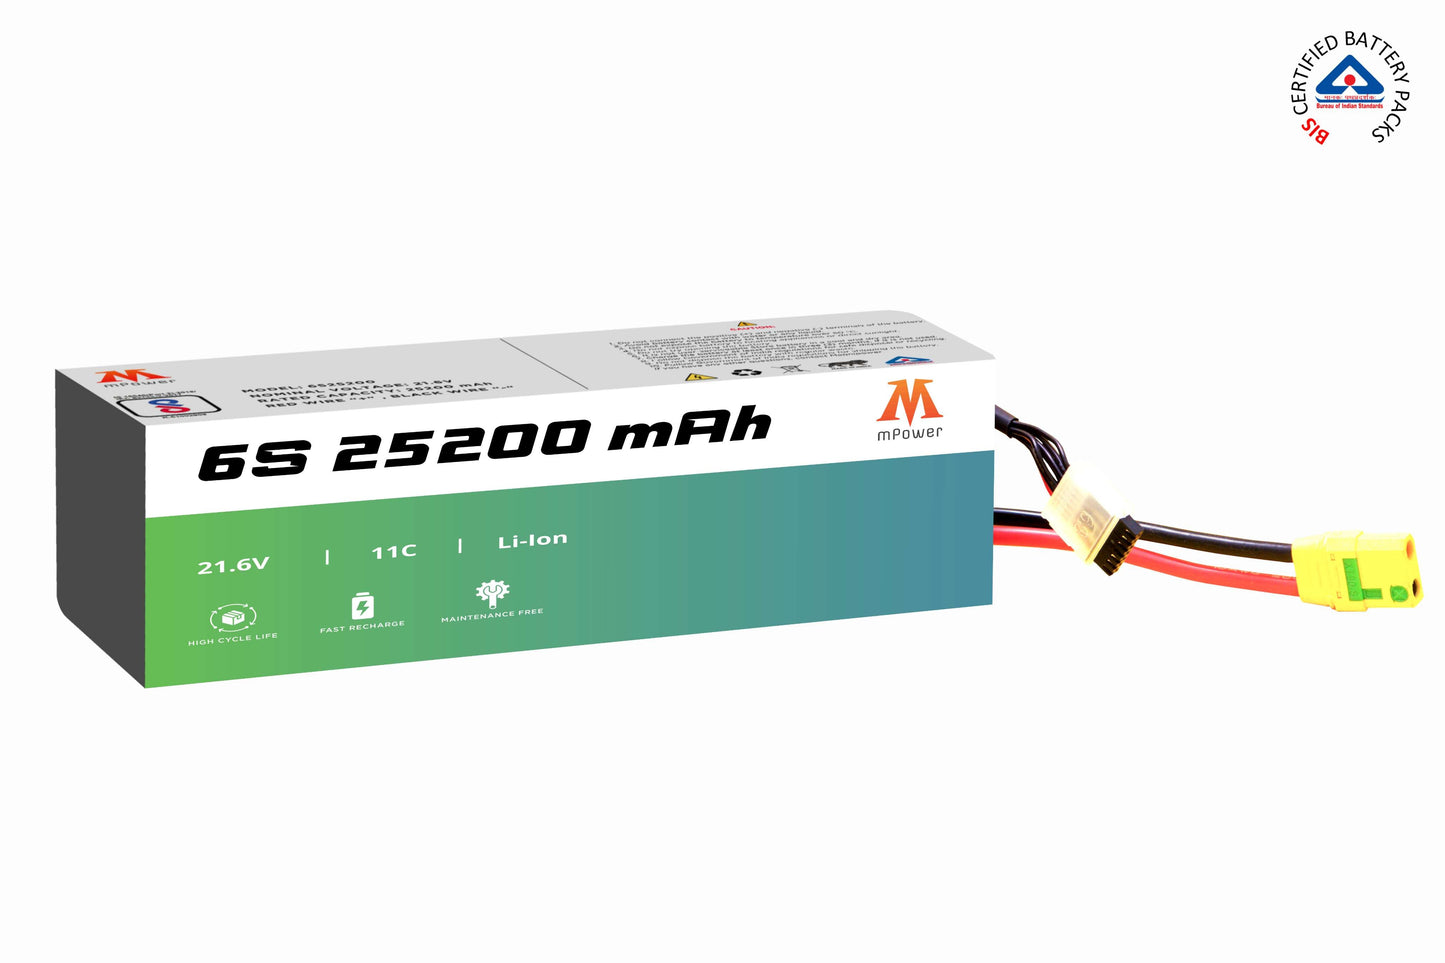 mPower 6S 25200mAh Lithium-Ion Battery for Delivery Drones